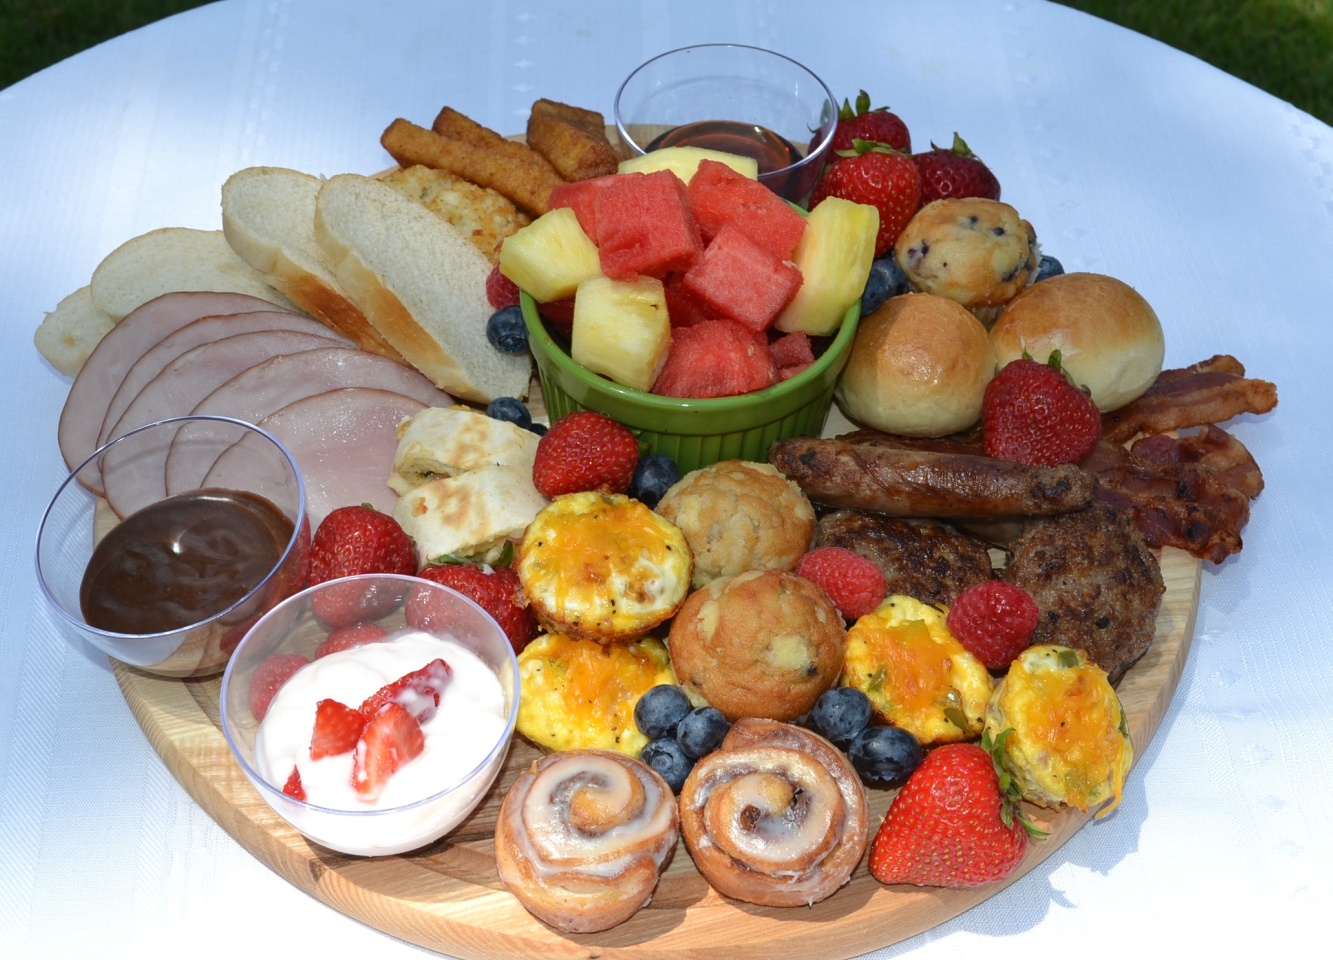 This Brunch Board for 2 is a delicious and fun way to enjoy a start to your day. A round, wooden cutting board is filled with a variety of breakfast foods, fresh fruits, dips, and sweet treats.